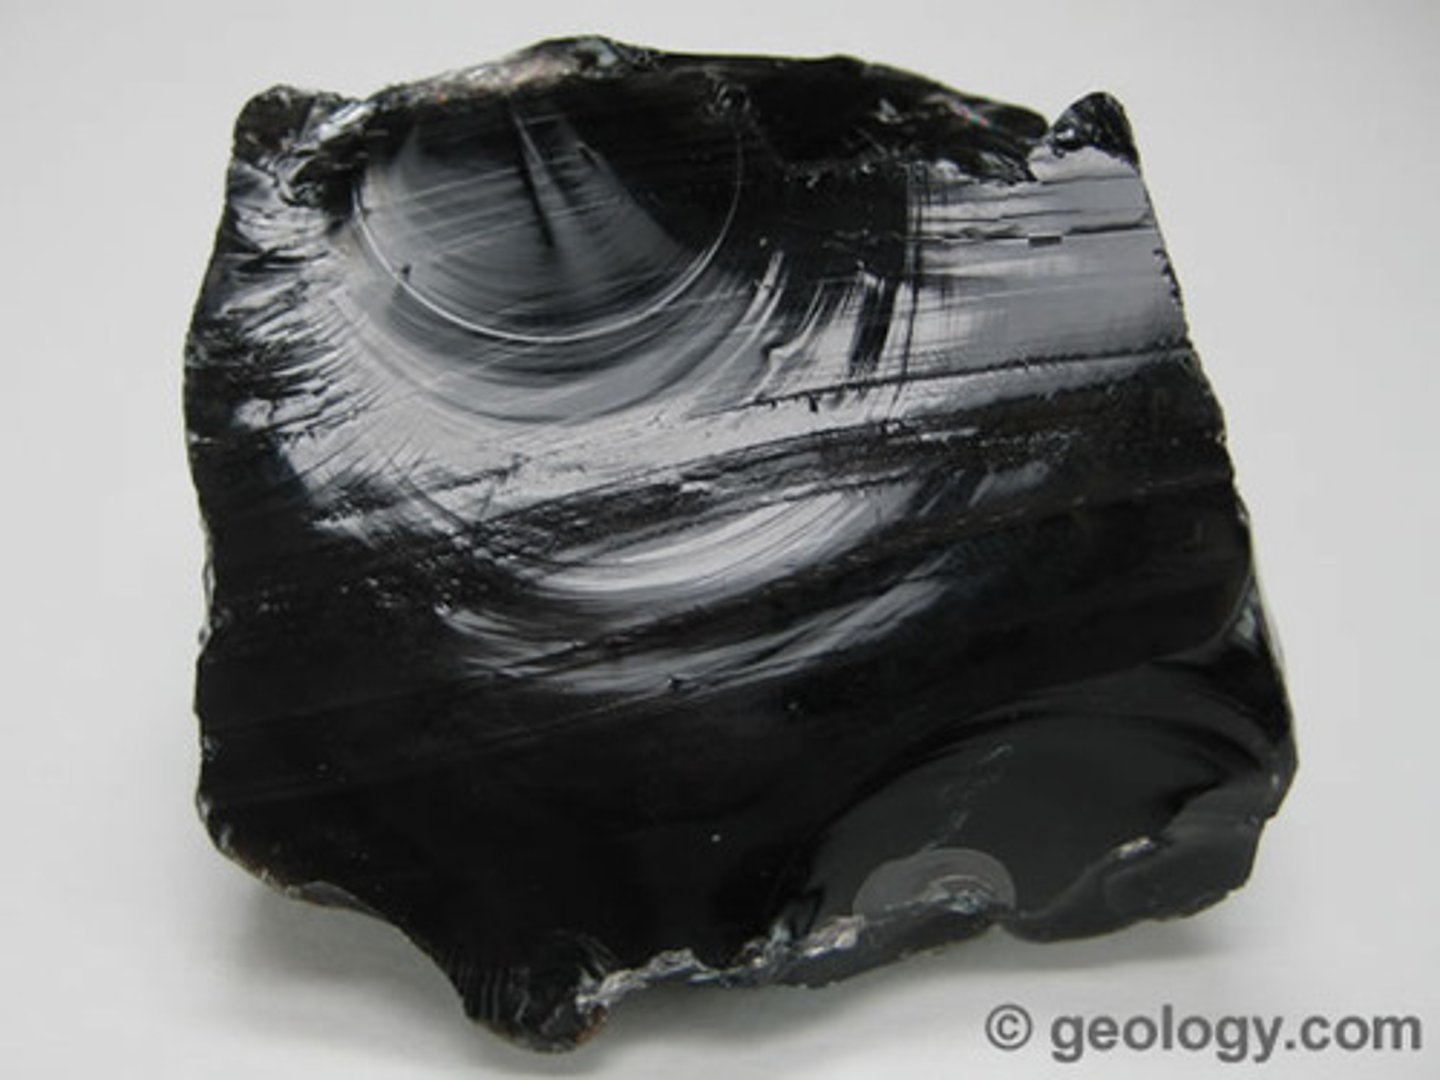 <p>Rock that forms from the cooling and solidification of lava at Earth's surface. If it cools fast, it is fine grained, and if it cools very fast, it is glassy. See image.</p>